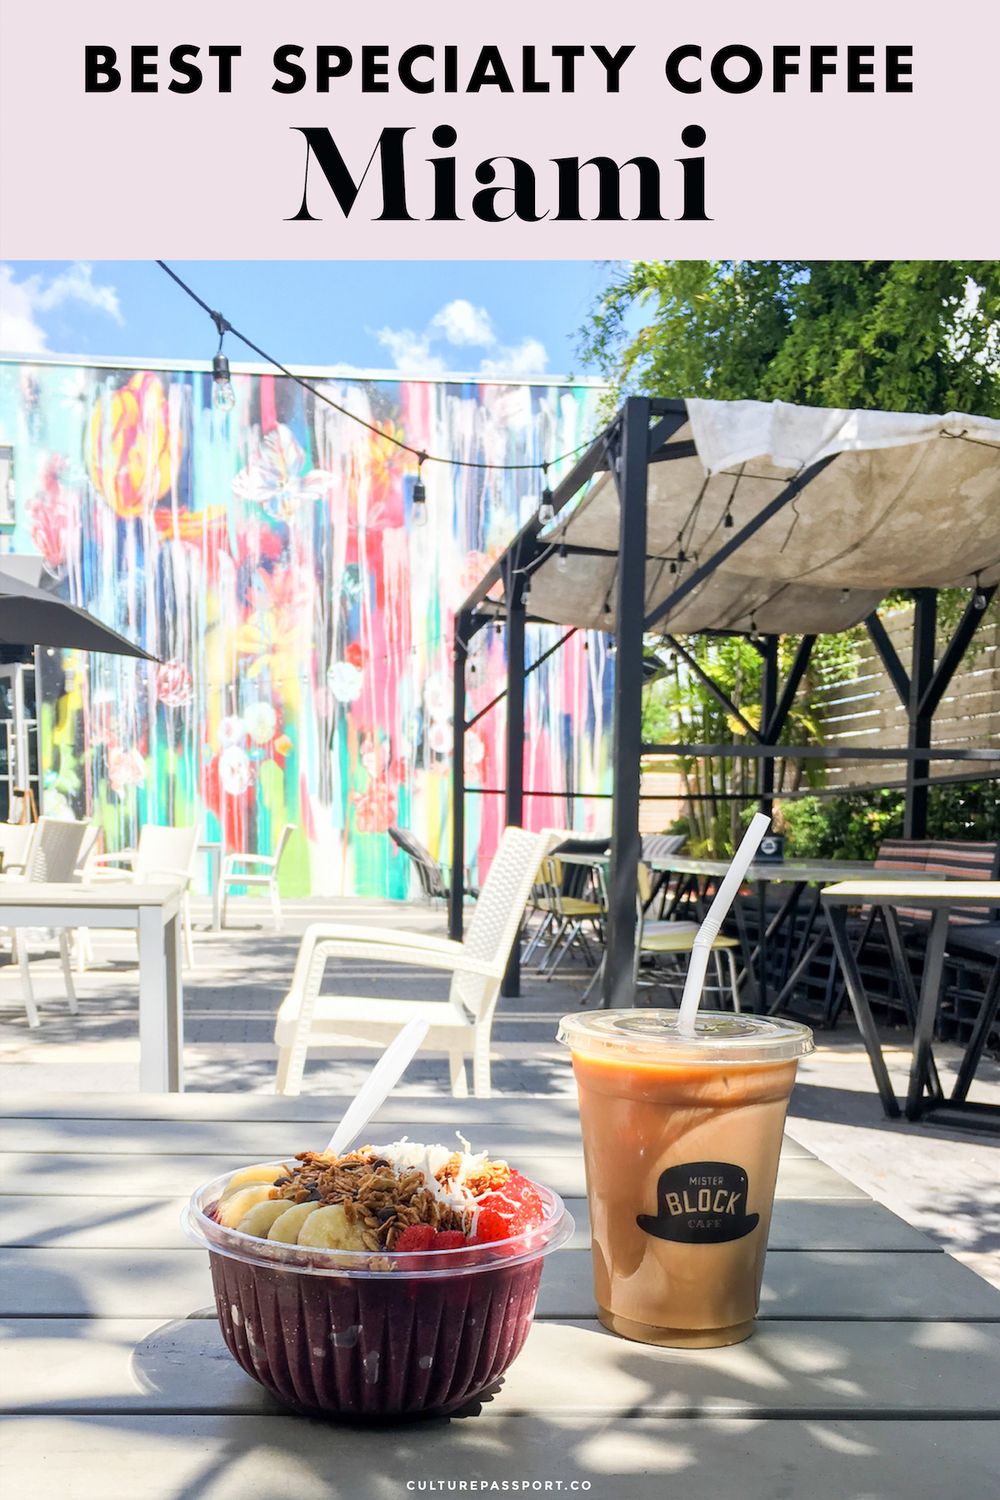 12 Best Coffee Shops In Miami To Get Your Caffeine Fix! Where to Find Artisanal coffee in Miami, Third wave coffee in Miami #specialtycoffee